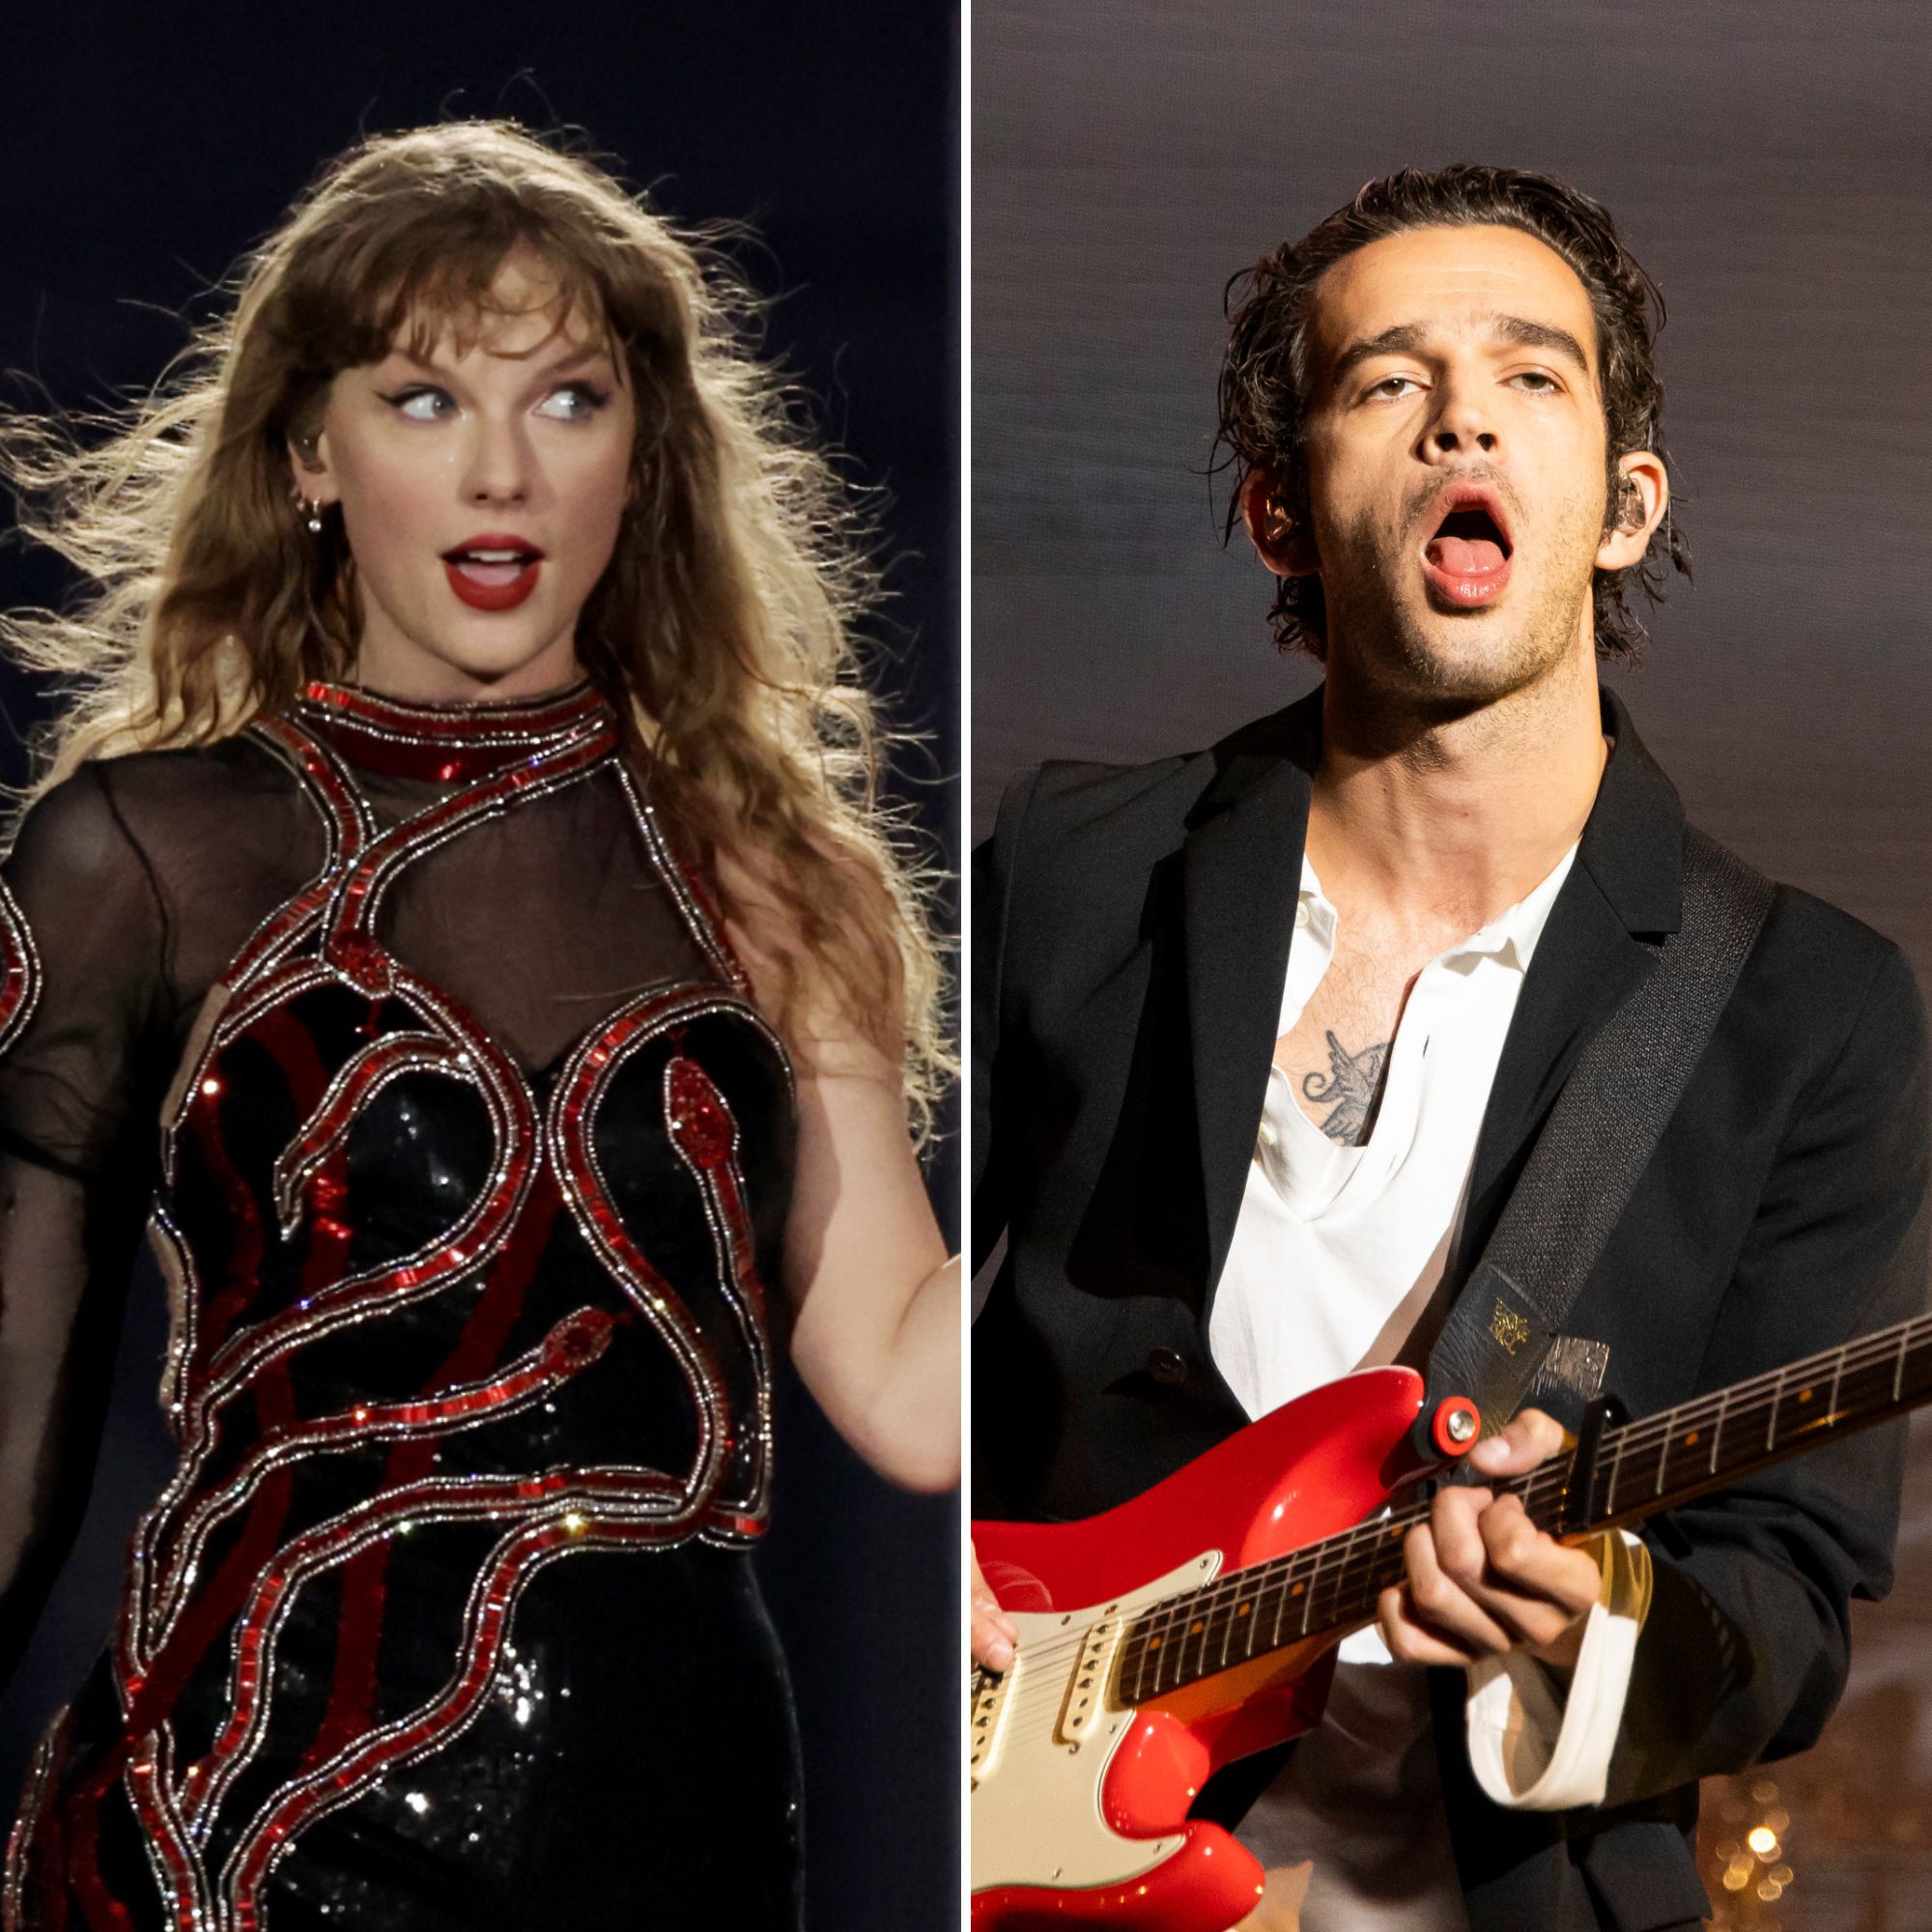 Taylor Swift Fans Think Some 'TTPD' Songs Are About Matty Healy: Inside Speculation